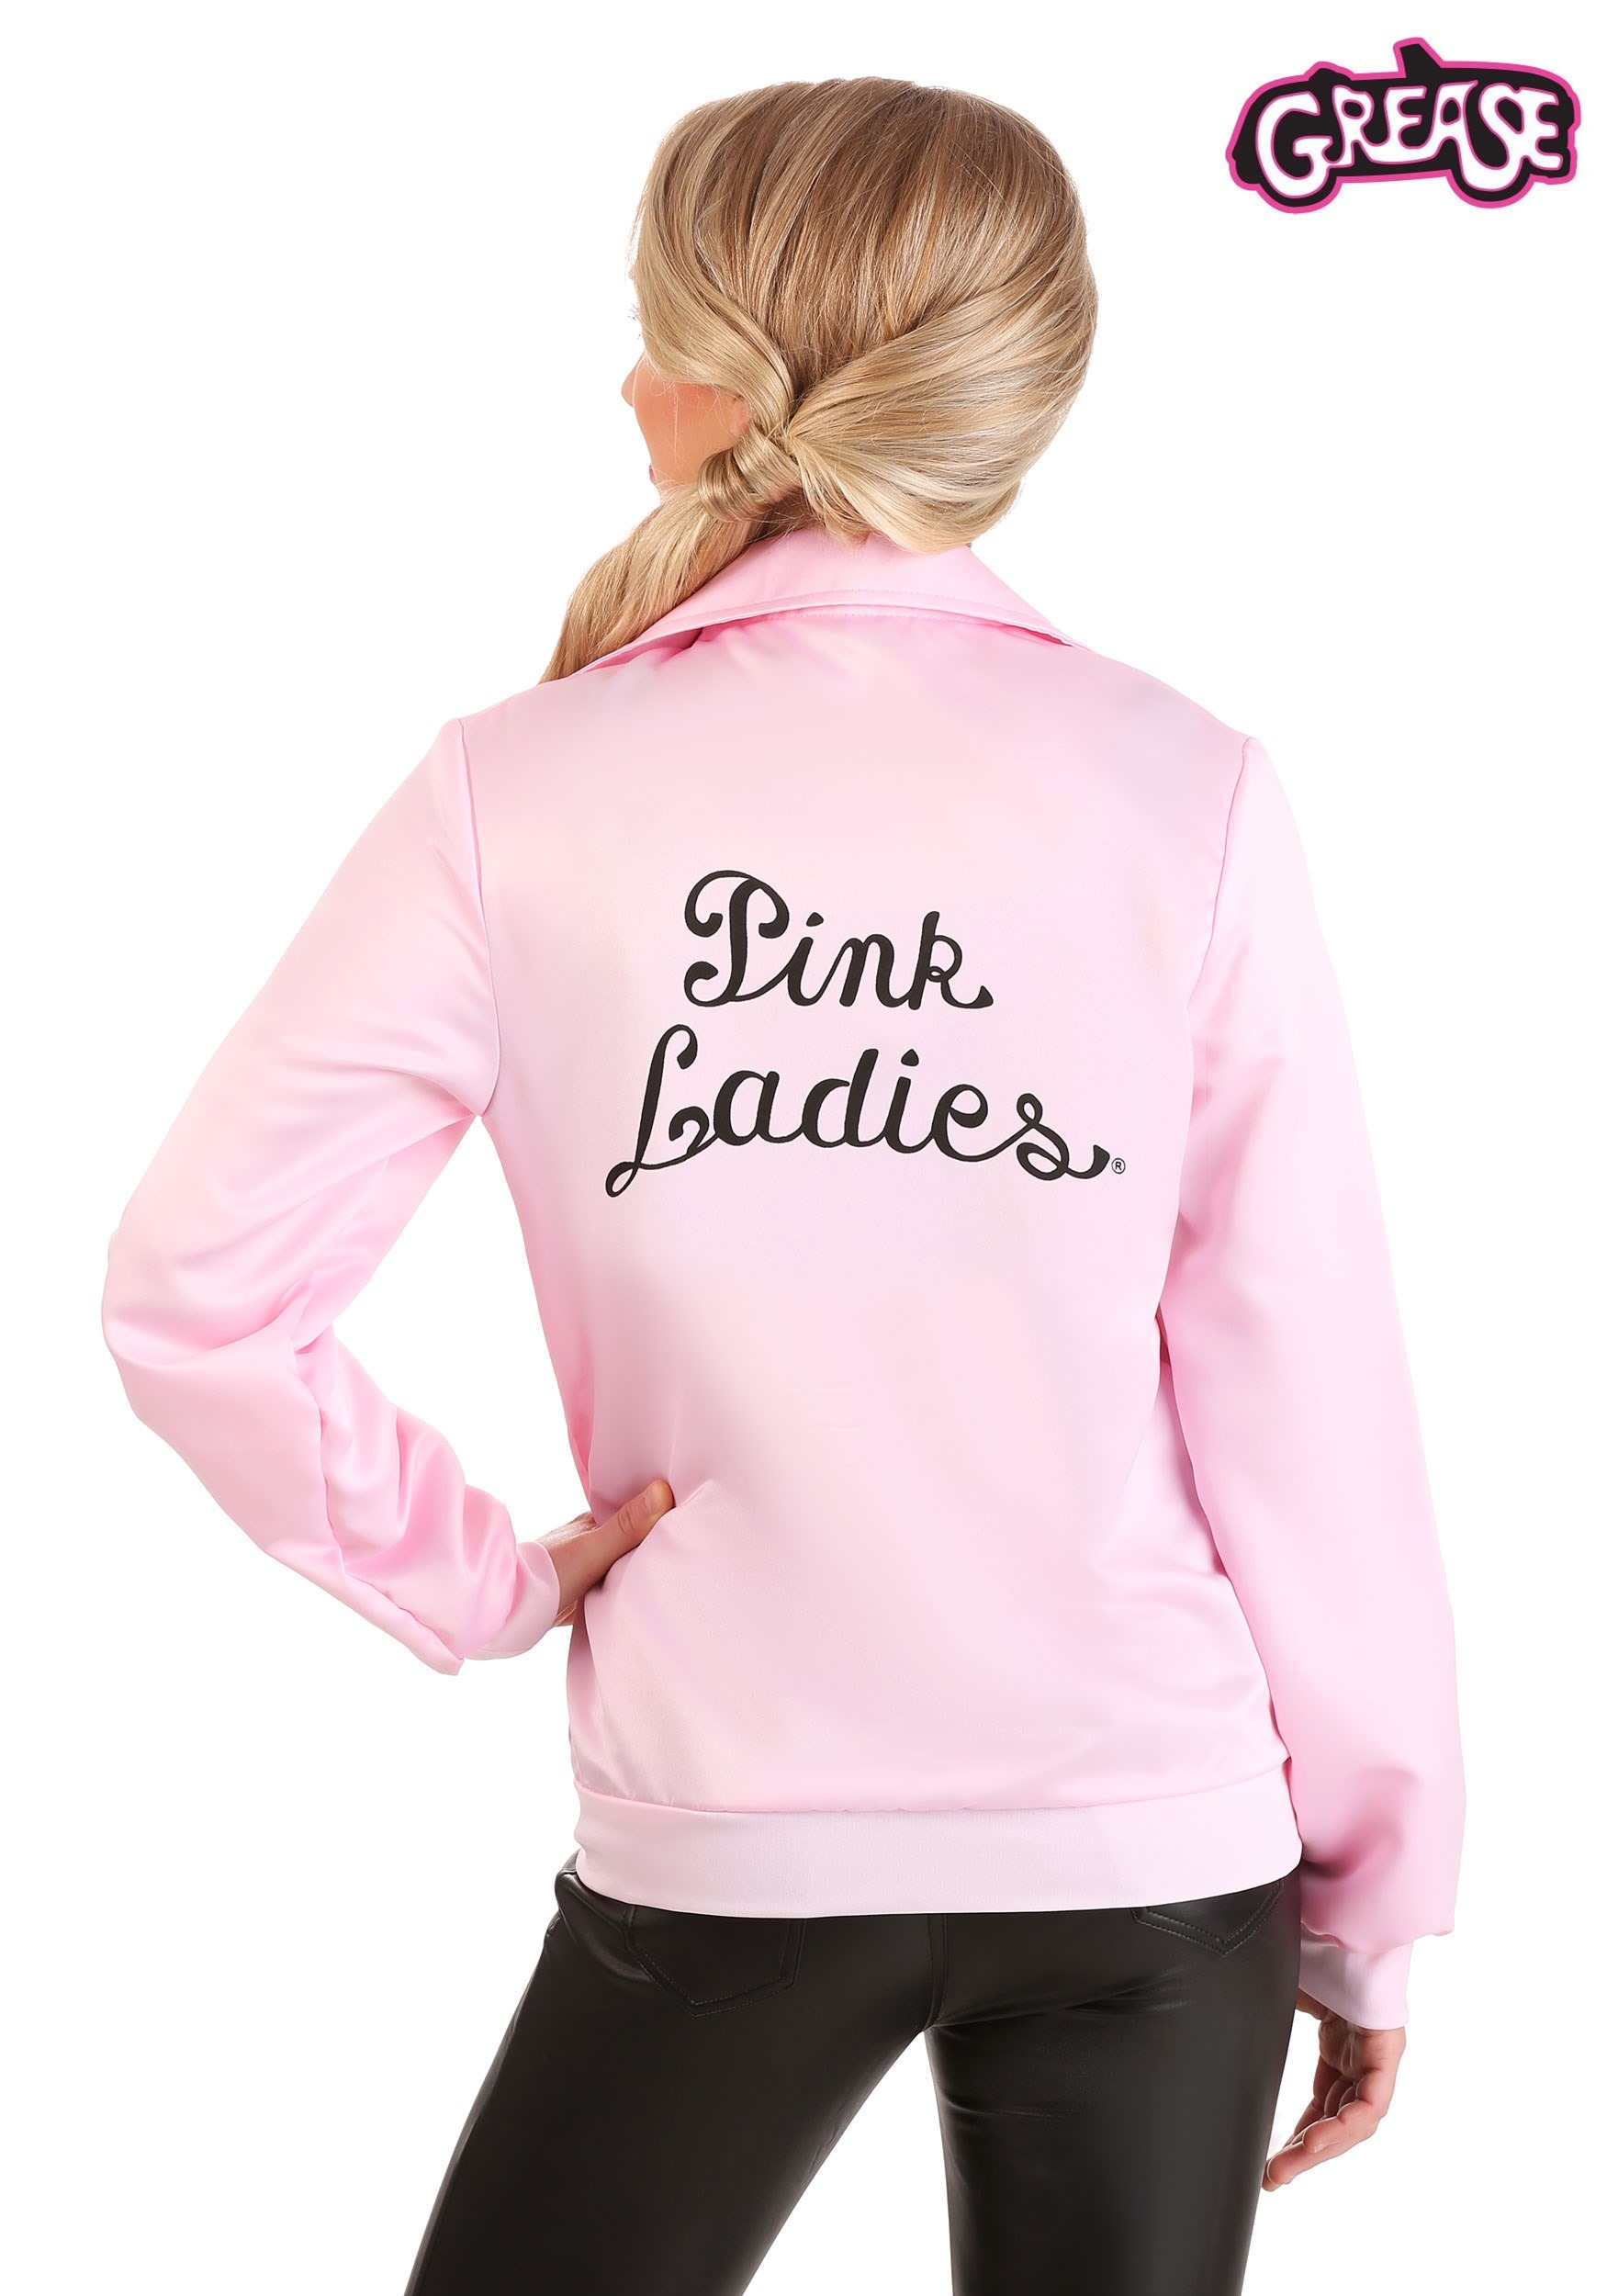 Grease Pink Ladies Costume Jacket for Women